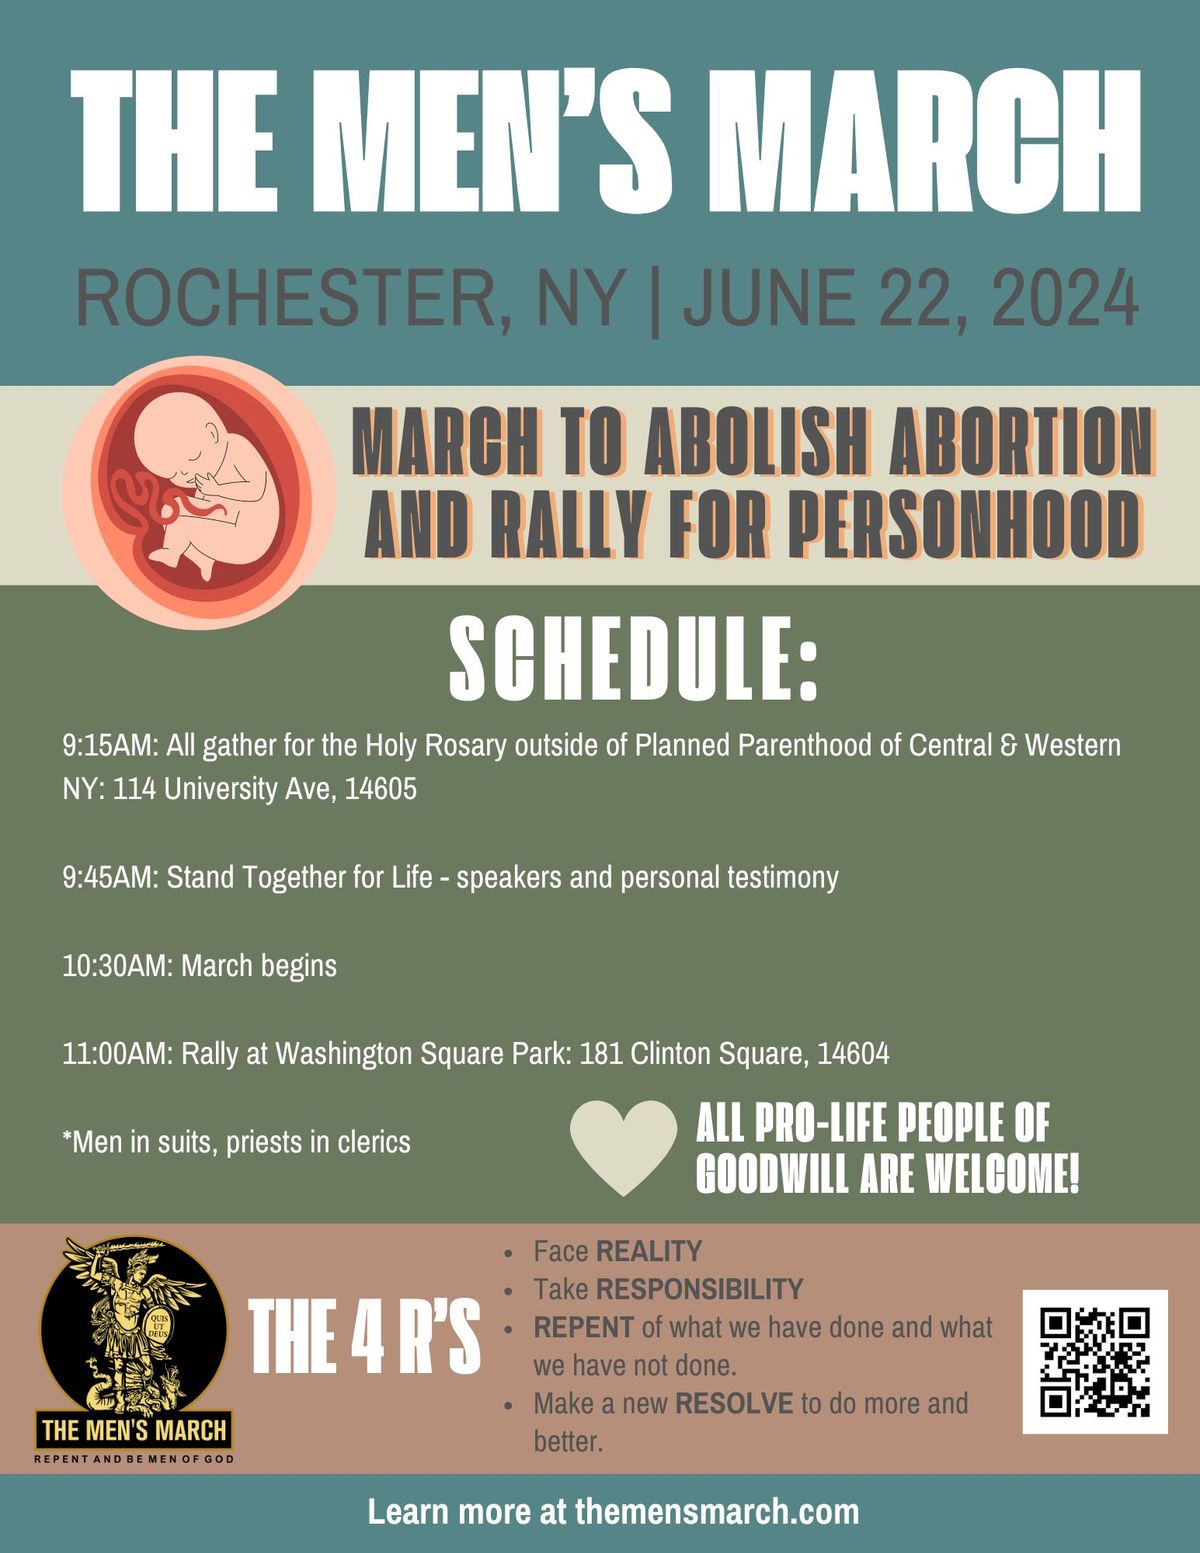 Stand Together for Life\/ and The National Men's March